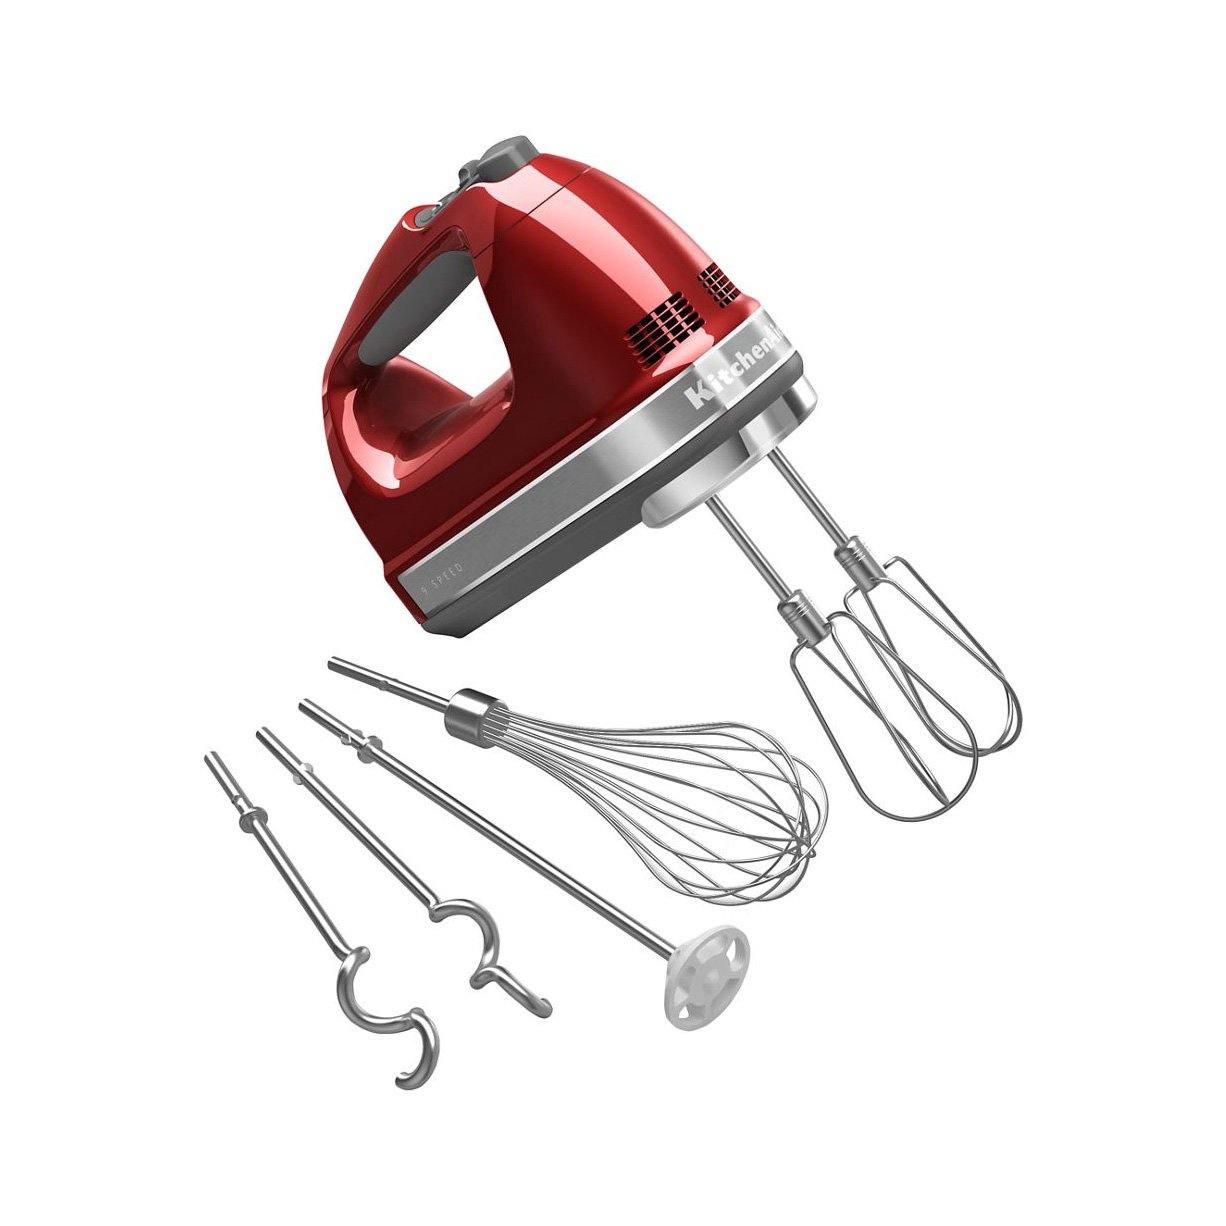 KITCHENAID 9 Speed Deluxe Hand Mixer, Candy Apple Red